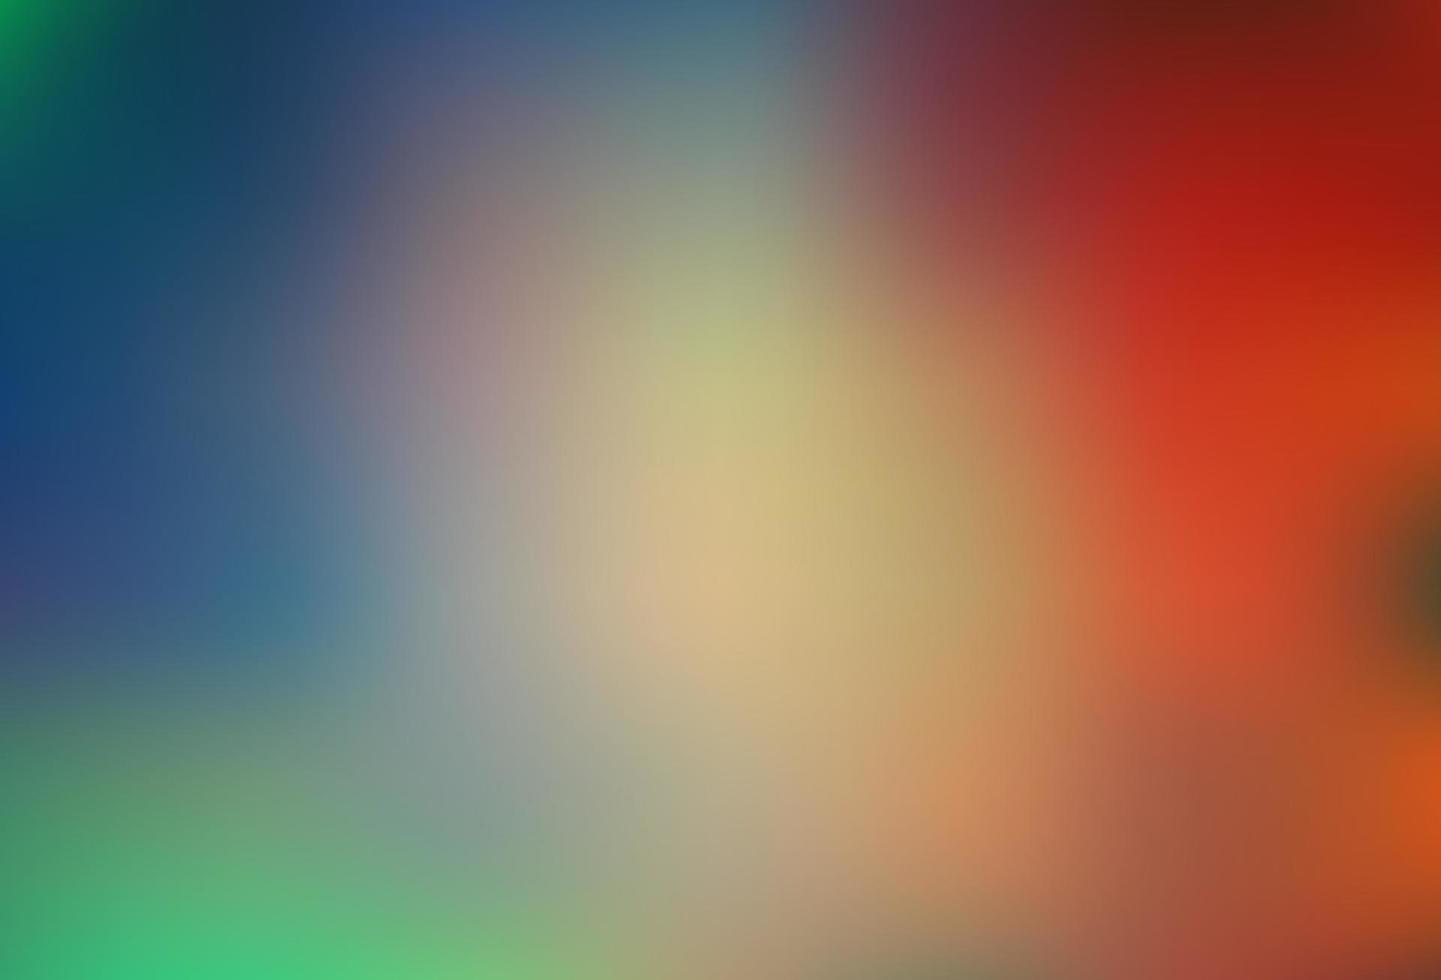 Light Green, Red vector blurred bright template.